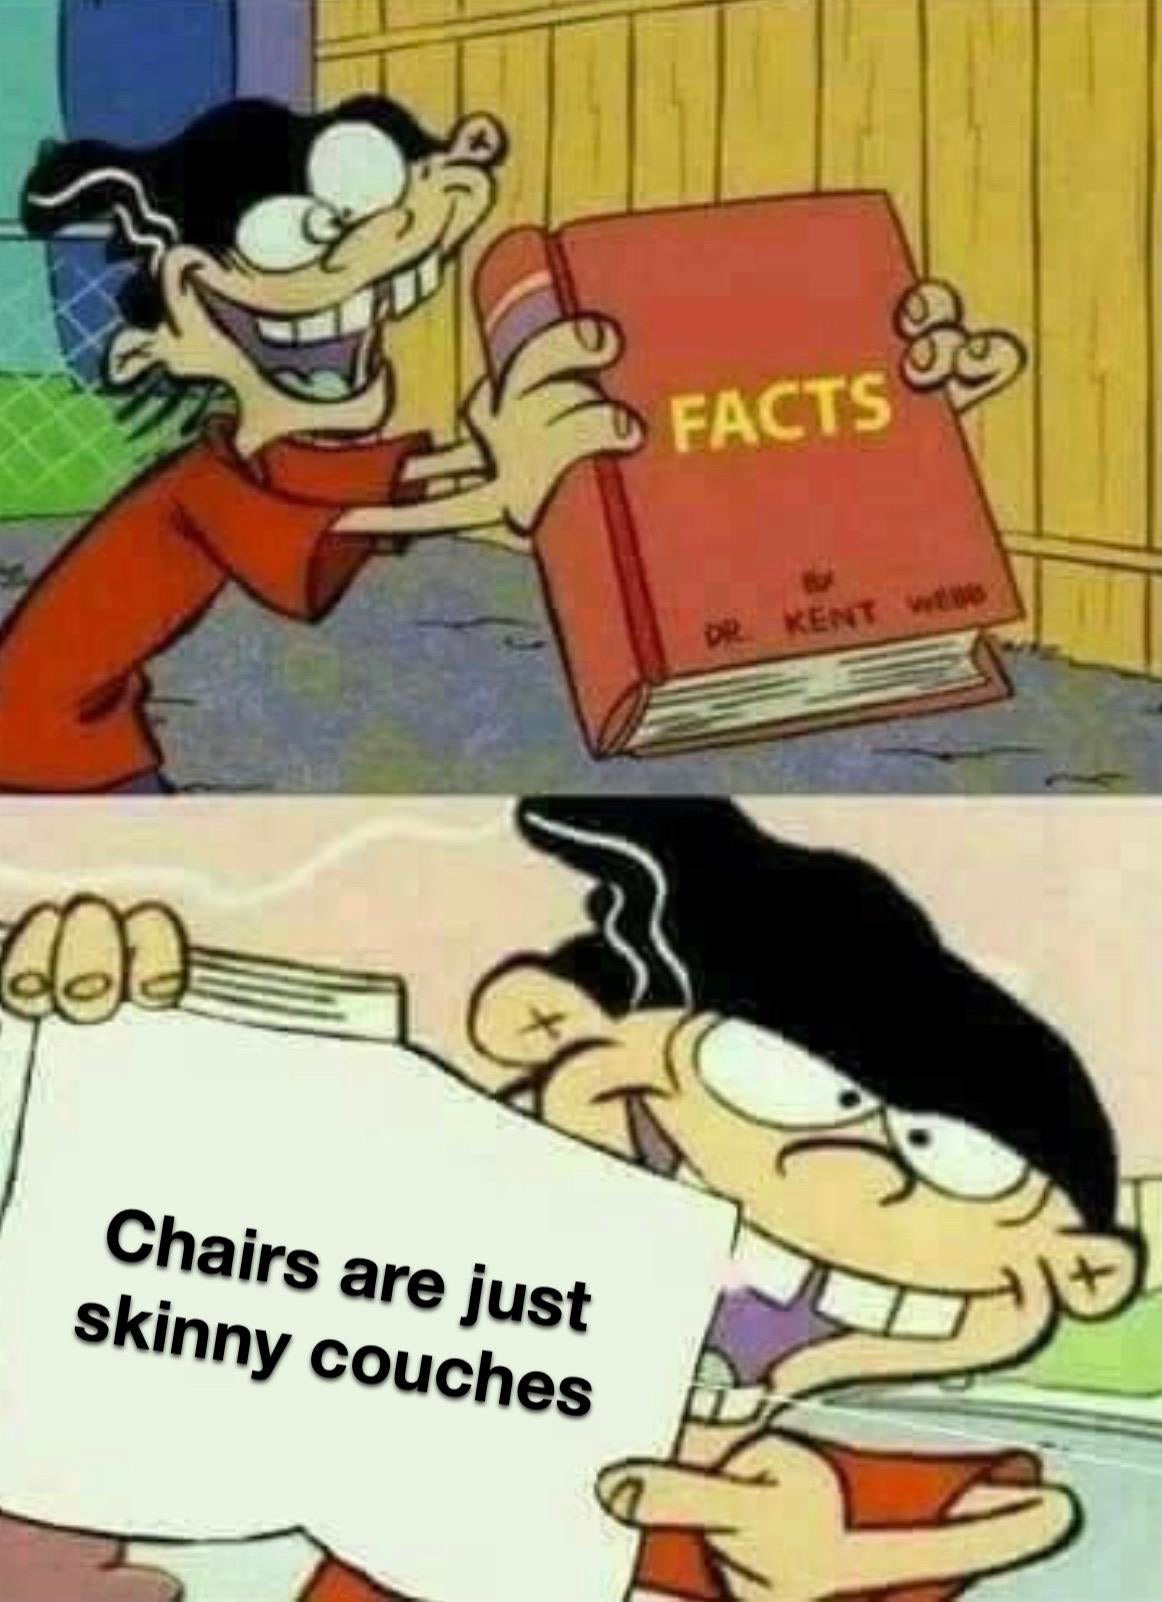 facts meme - Facts Dr Kent w Chairs are just skinny couches 3